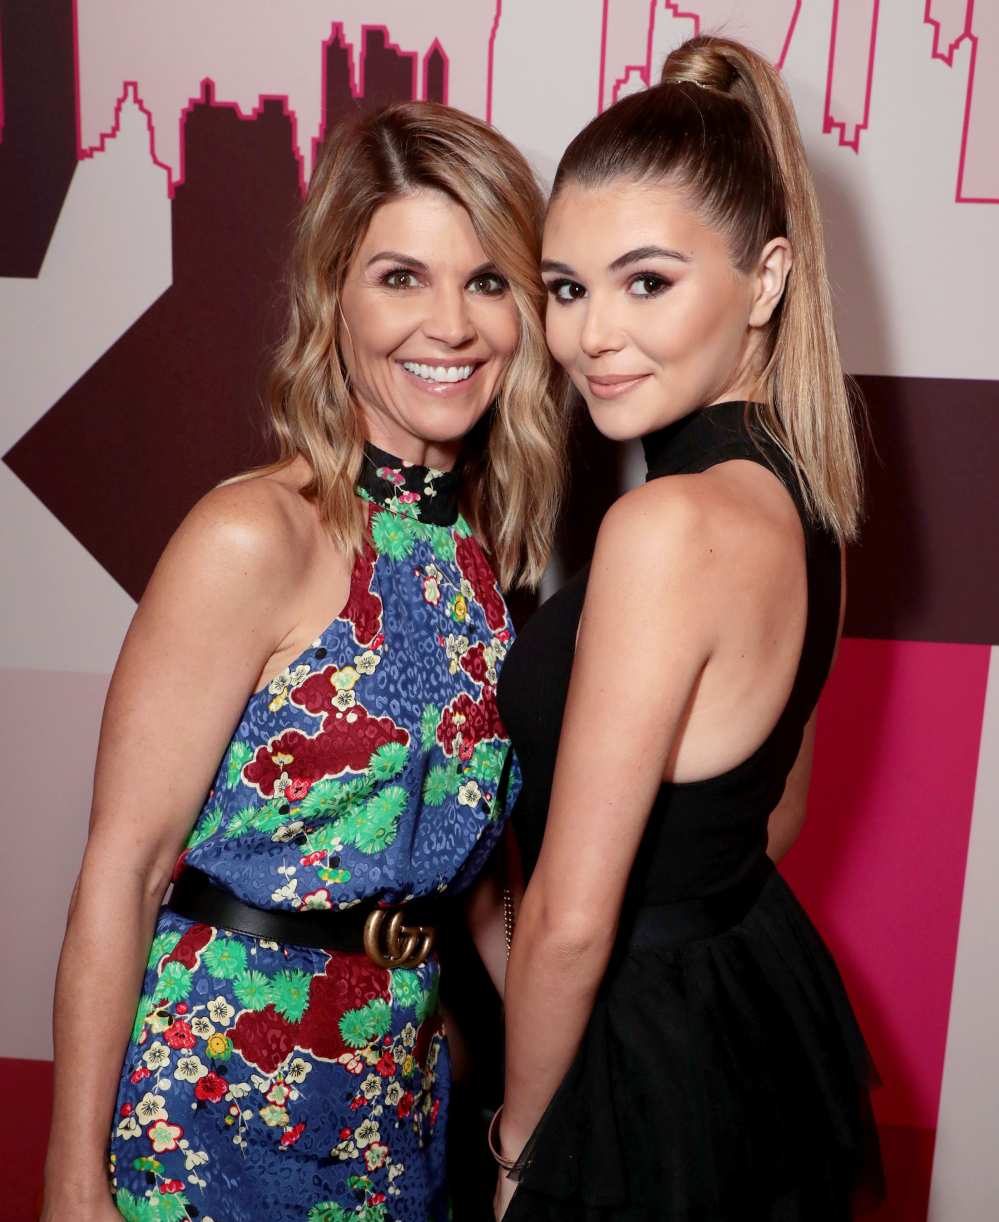 Why Olivia Jade Giannulli Thinks Now Is the Right Time to Return to YouTube